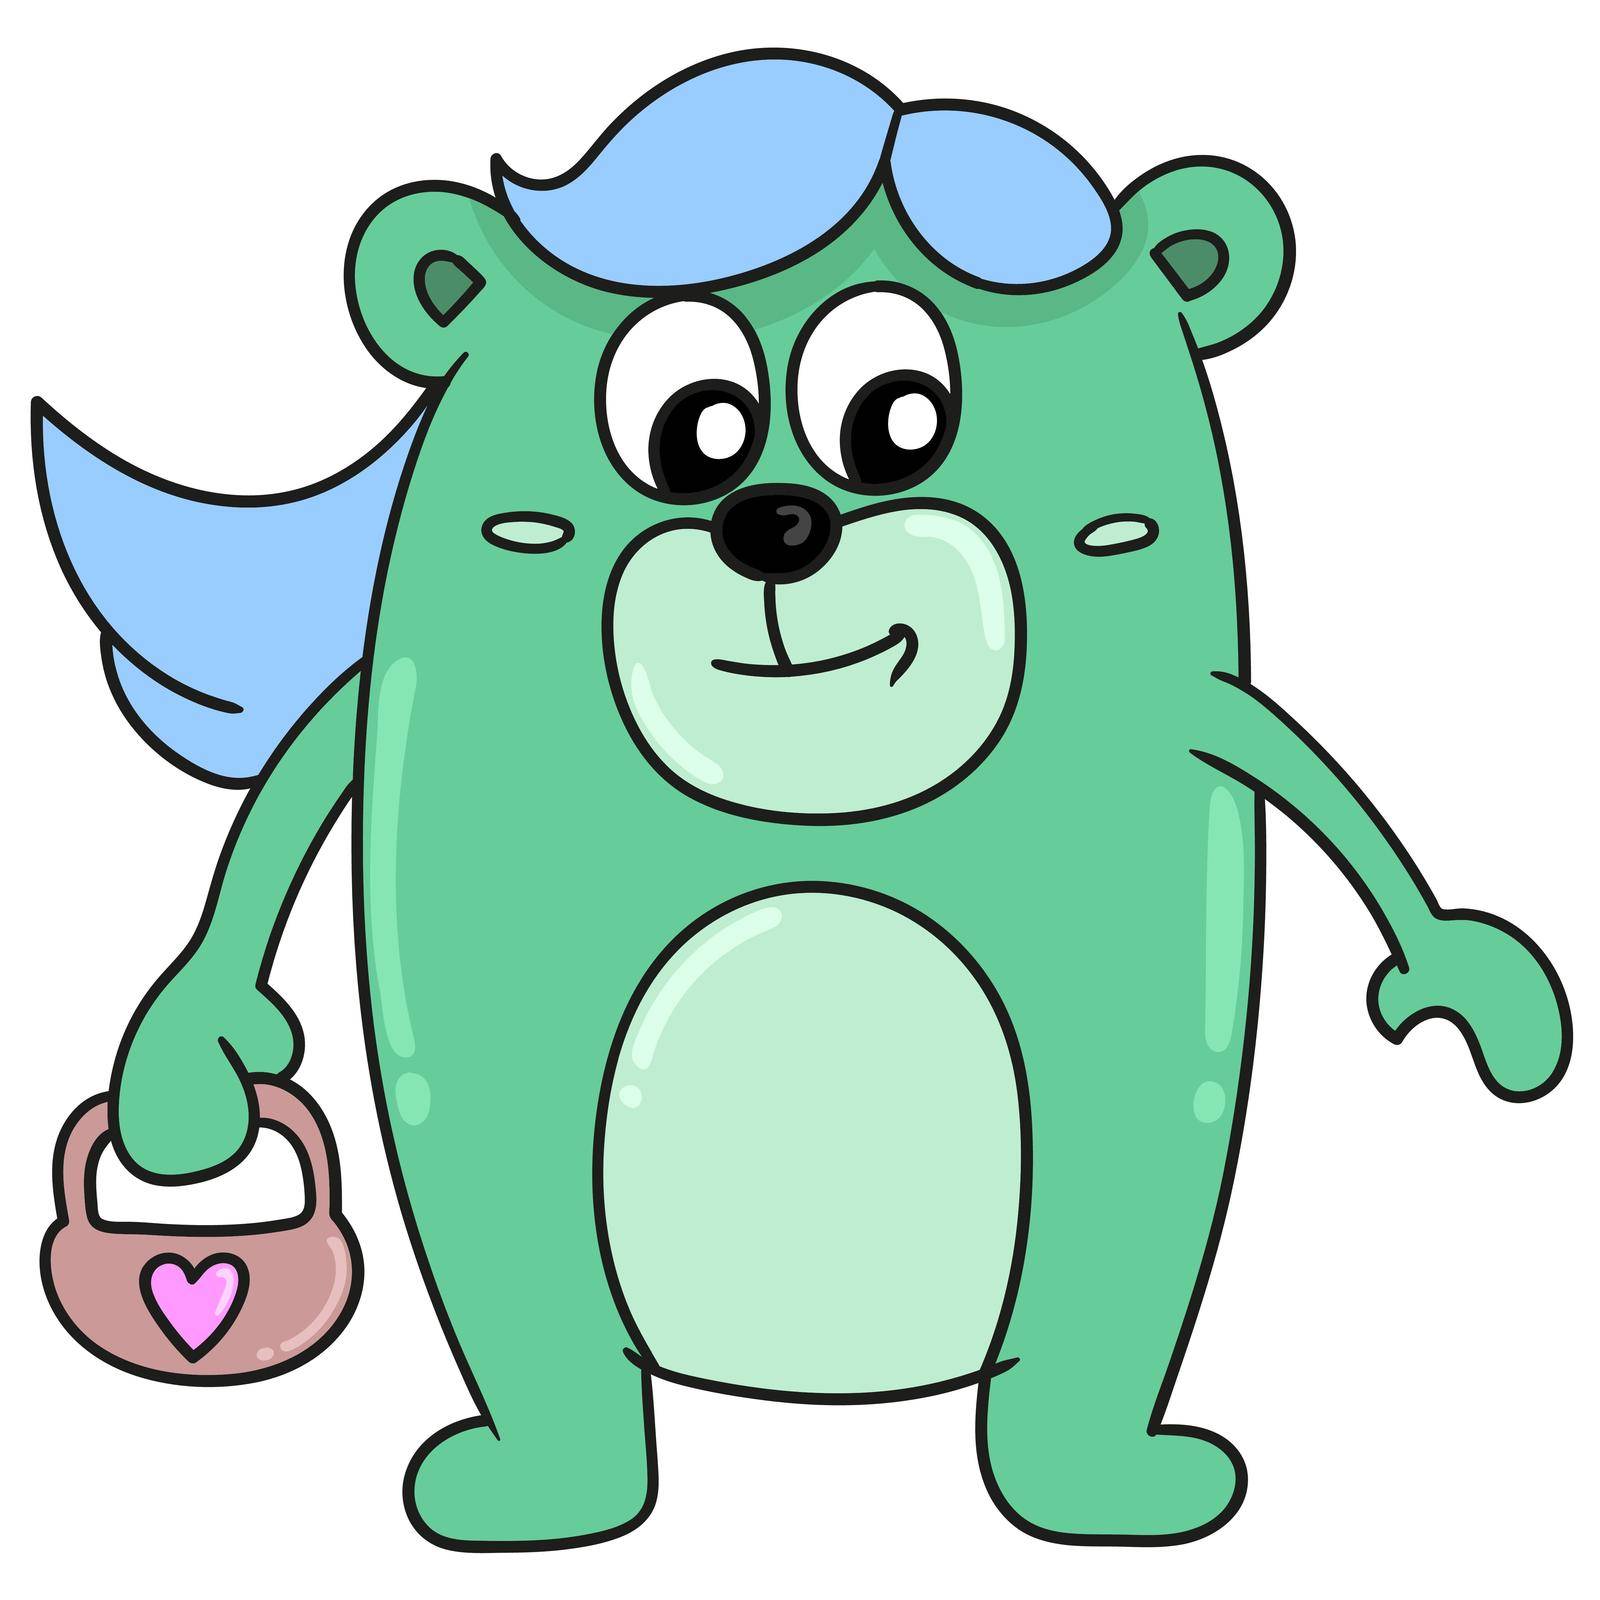 cute creature is on the go shopping. cartoon caharacter cute doodle draw